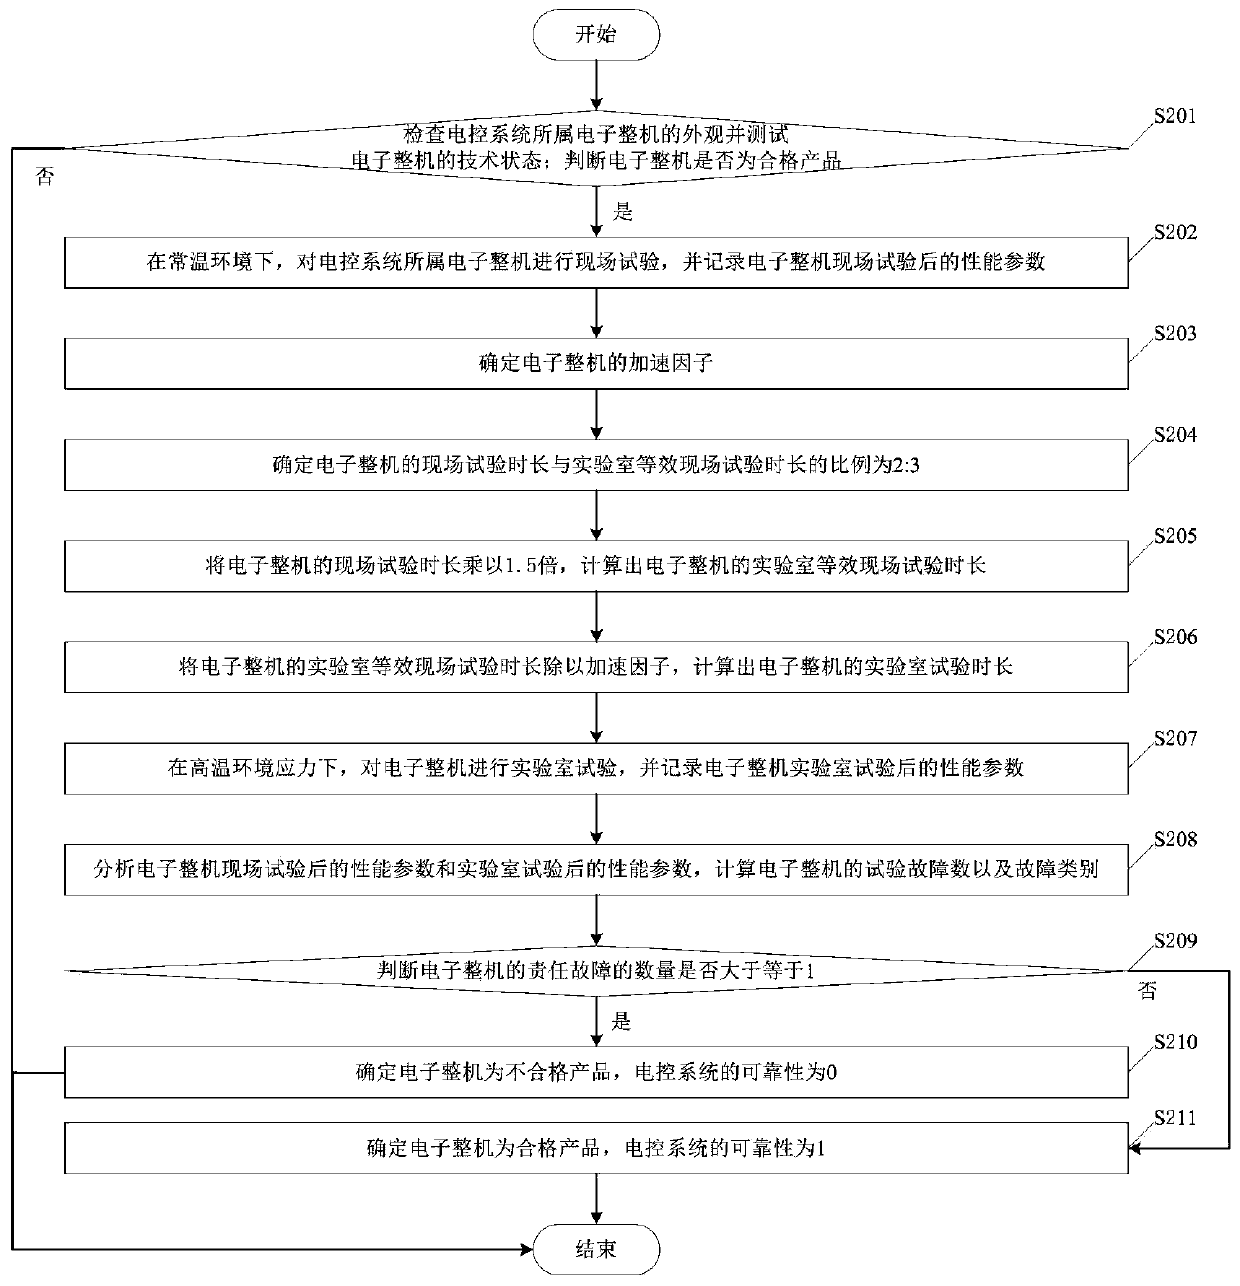 Reliability index evaluation method of electronic control system of instrument